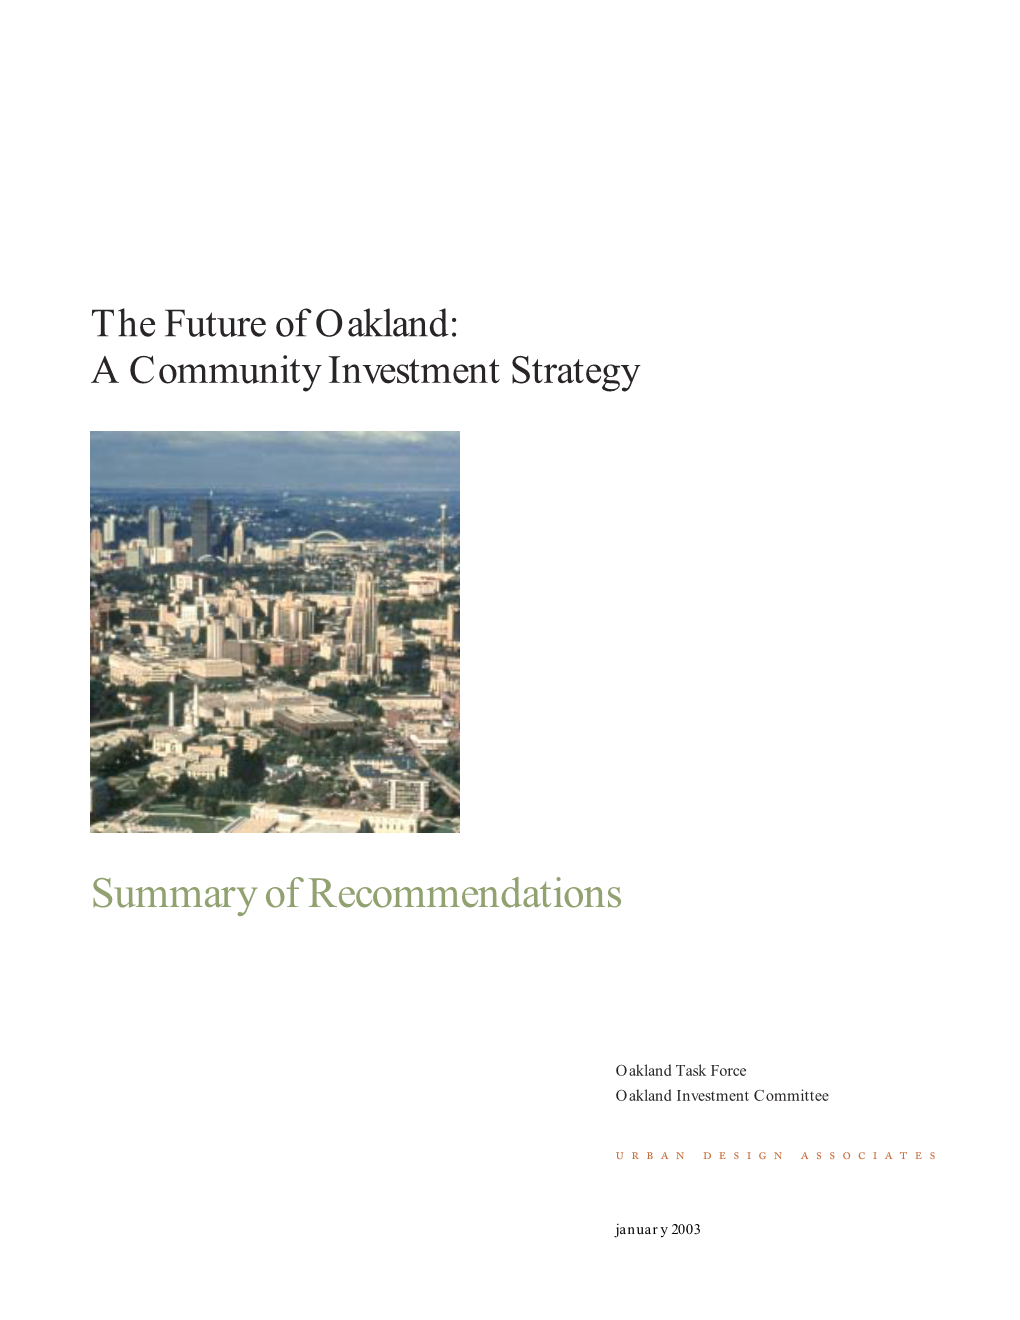 Future of Oakland: a Community Investment Strategy